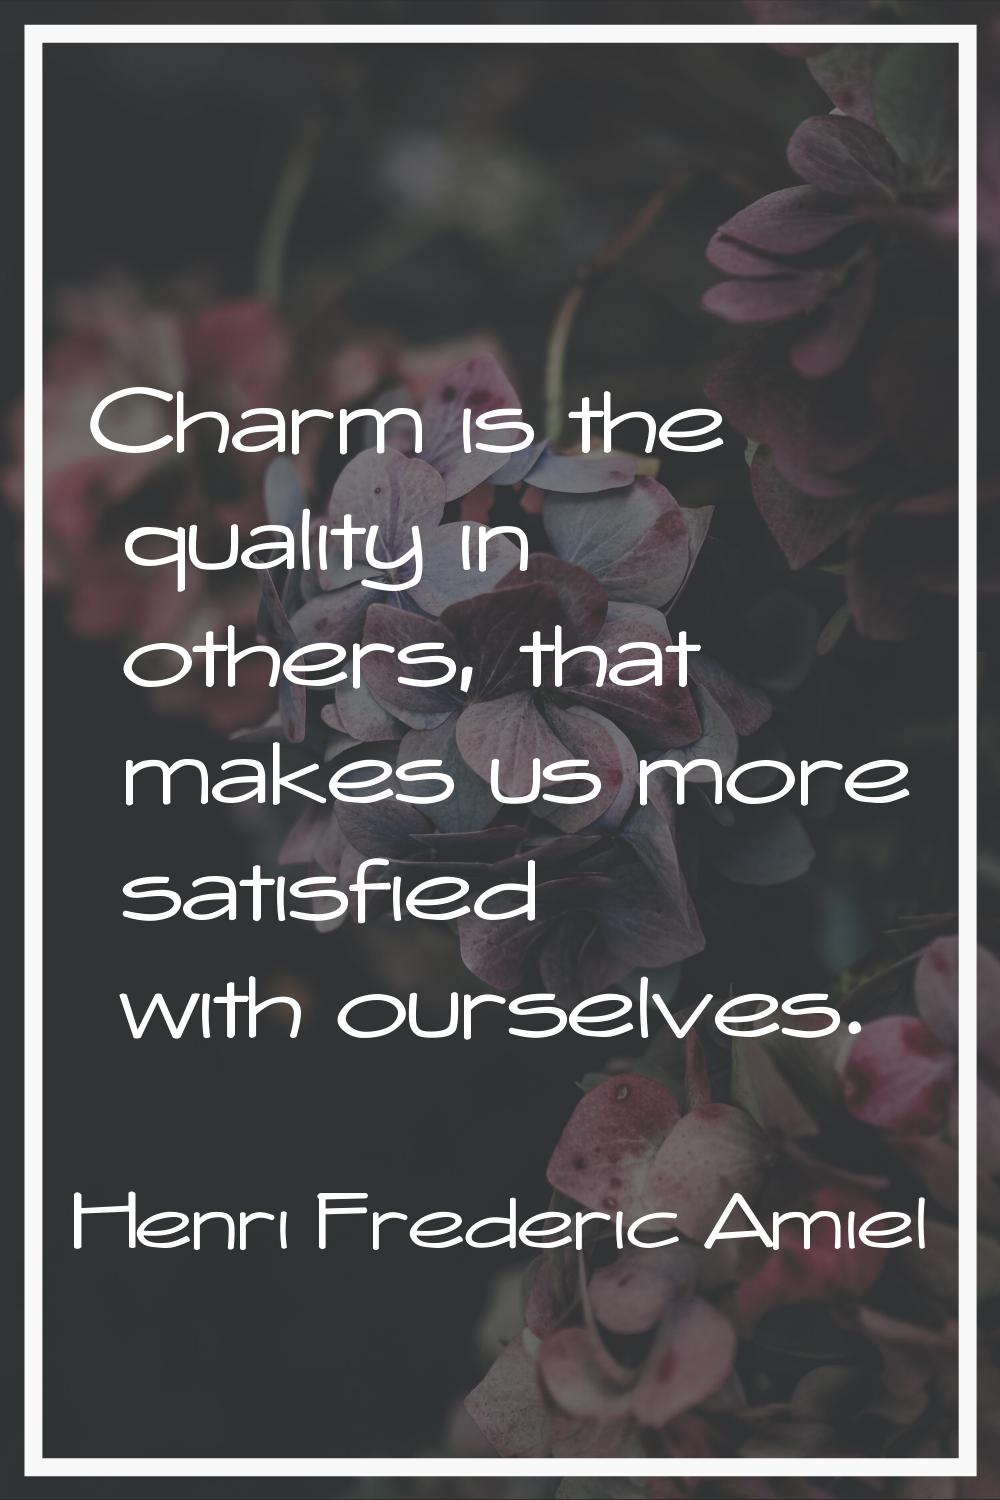 Charm is the quality in others, that makes us more satisfied with ourselves.